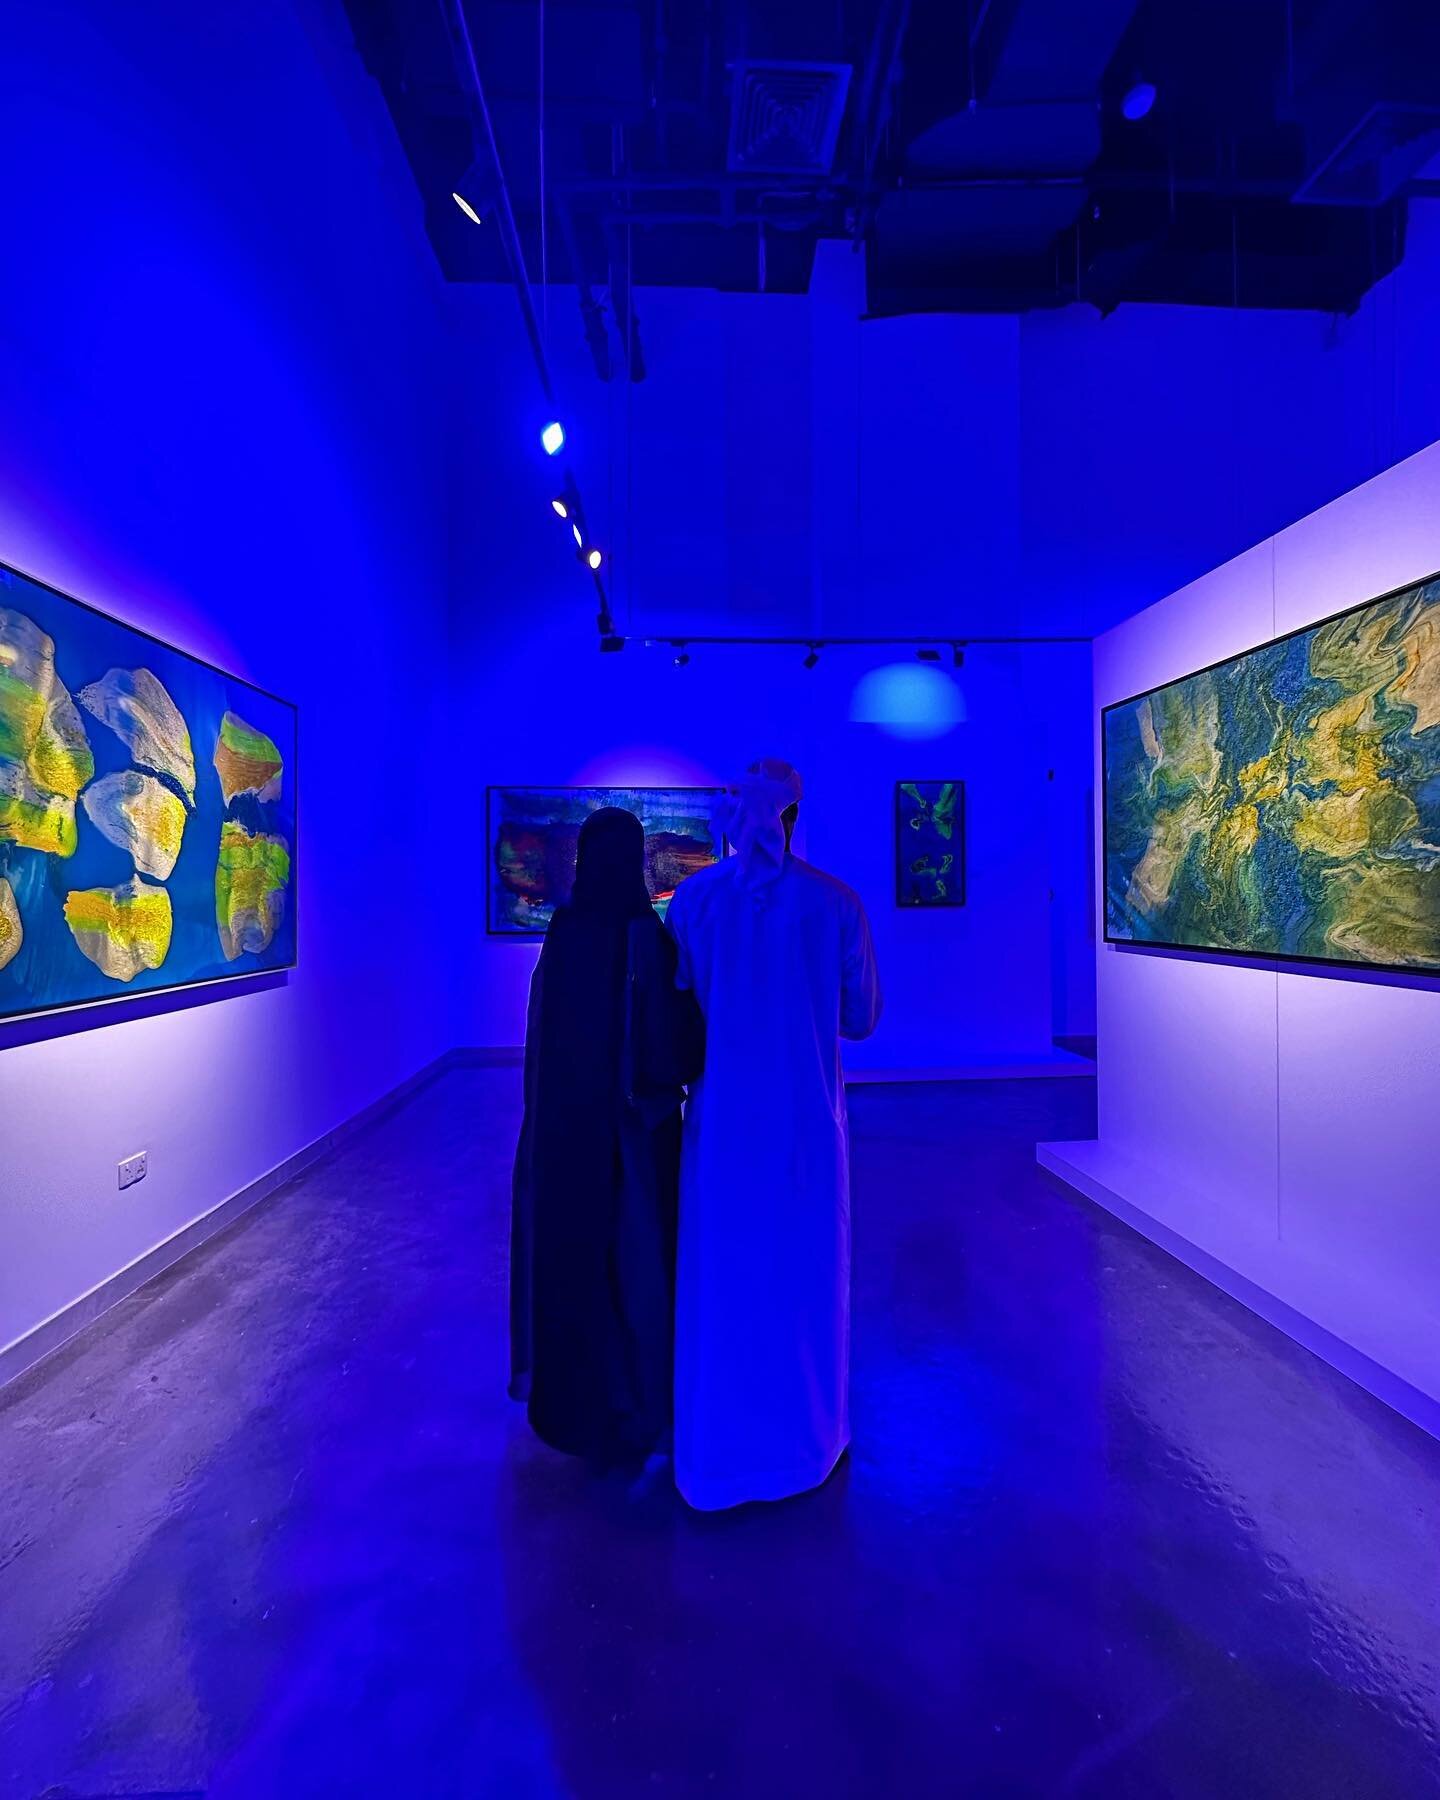 Love in the air at our exhibition &ldquo;THE WINGS&rdquo; at the Boccara Art Gallery in Dubai 💙🦋

● Exhibition Dates: 4th - 24th May 2023 (free-to-attend and open to the general public)
● Time: 10am &ndash; 10pm (daily)
● Venue: BOCCARA Gallery, Zo